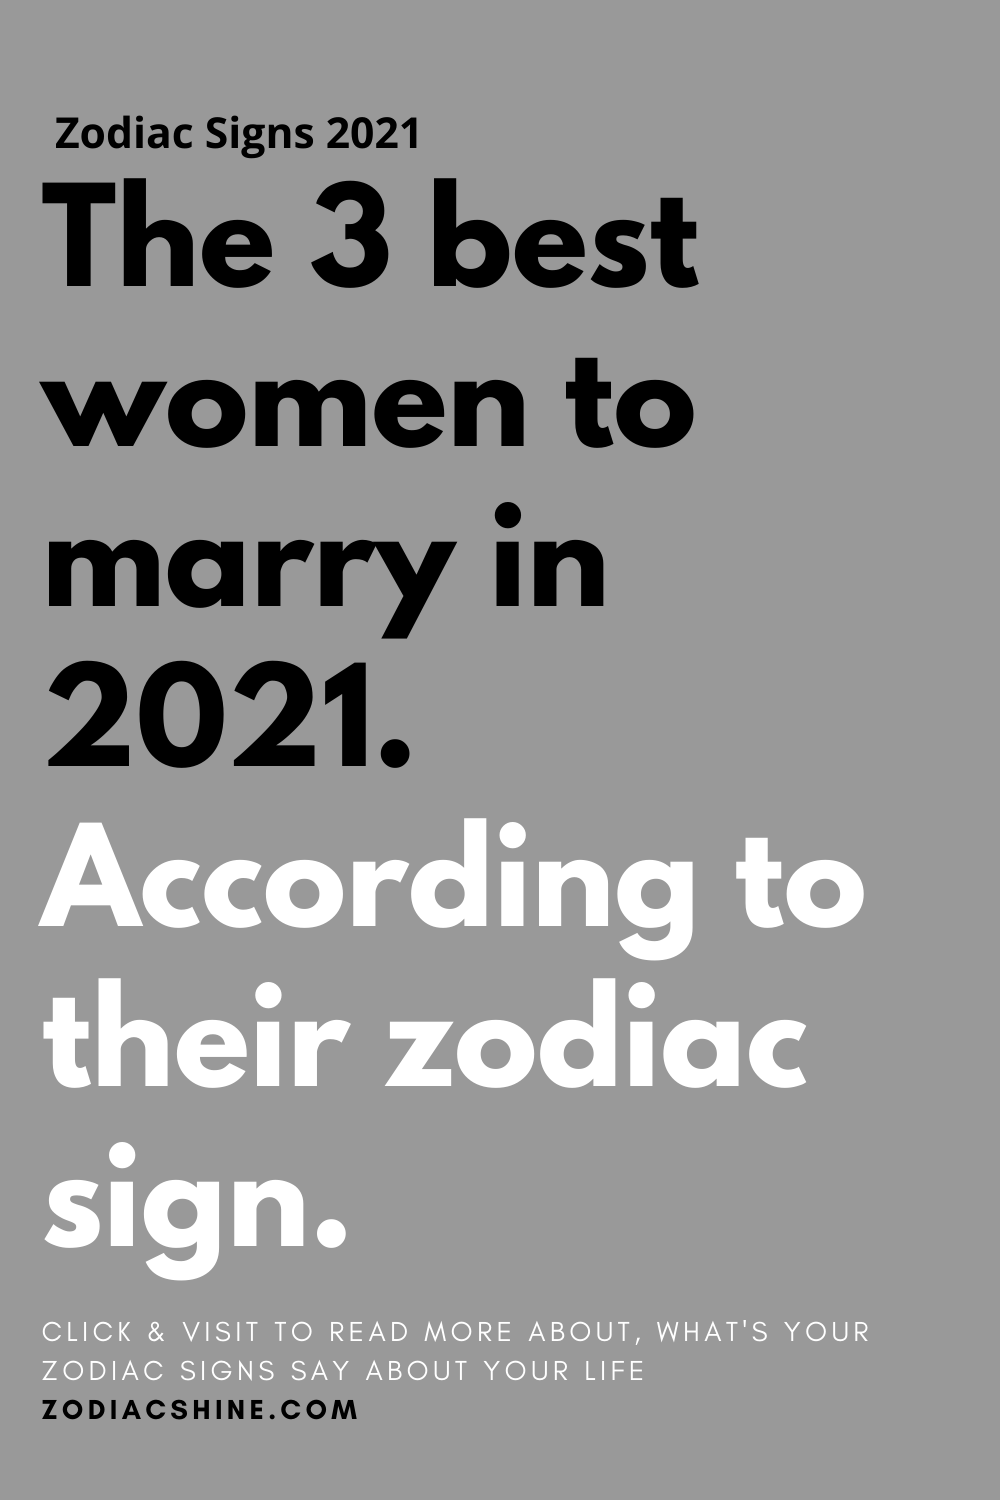 The 3 best women to marry in 2021. According to their zodiac sign.